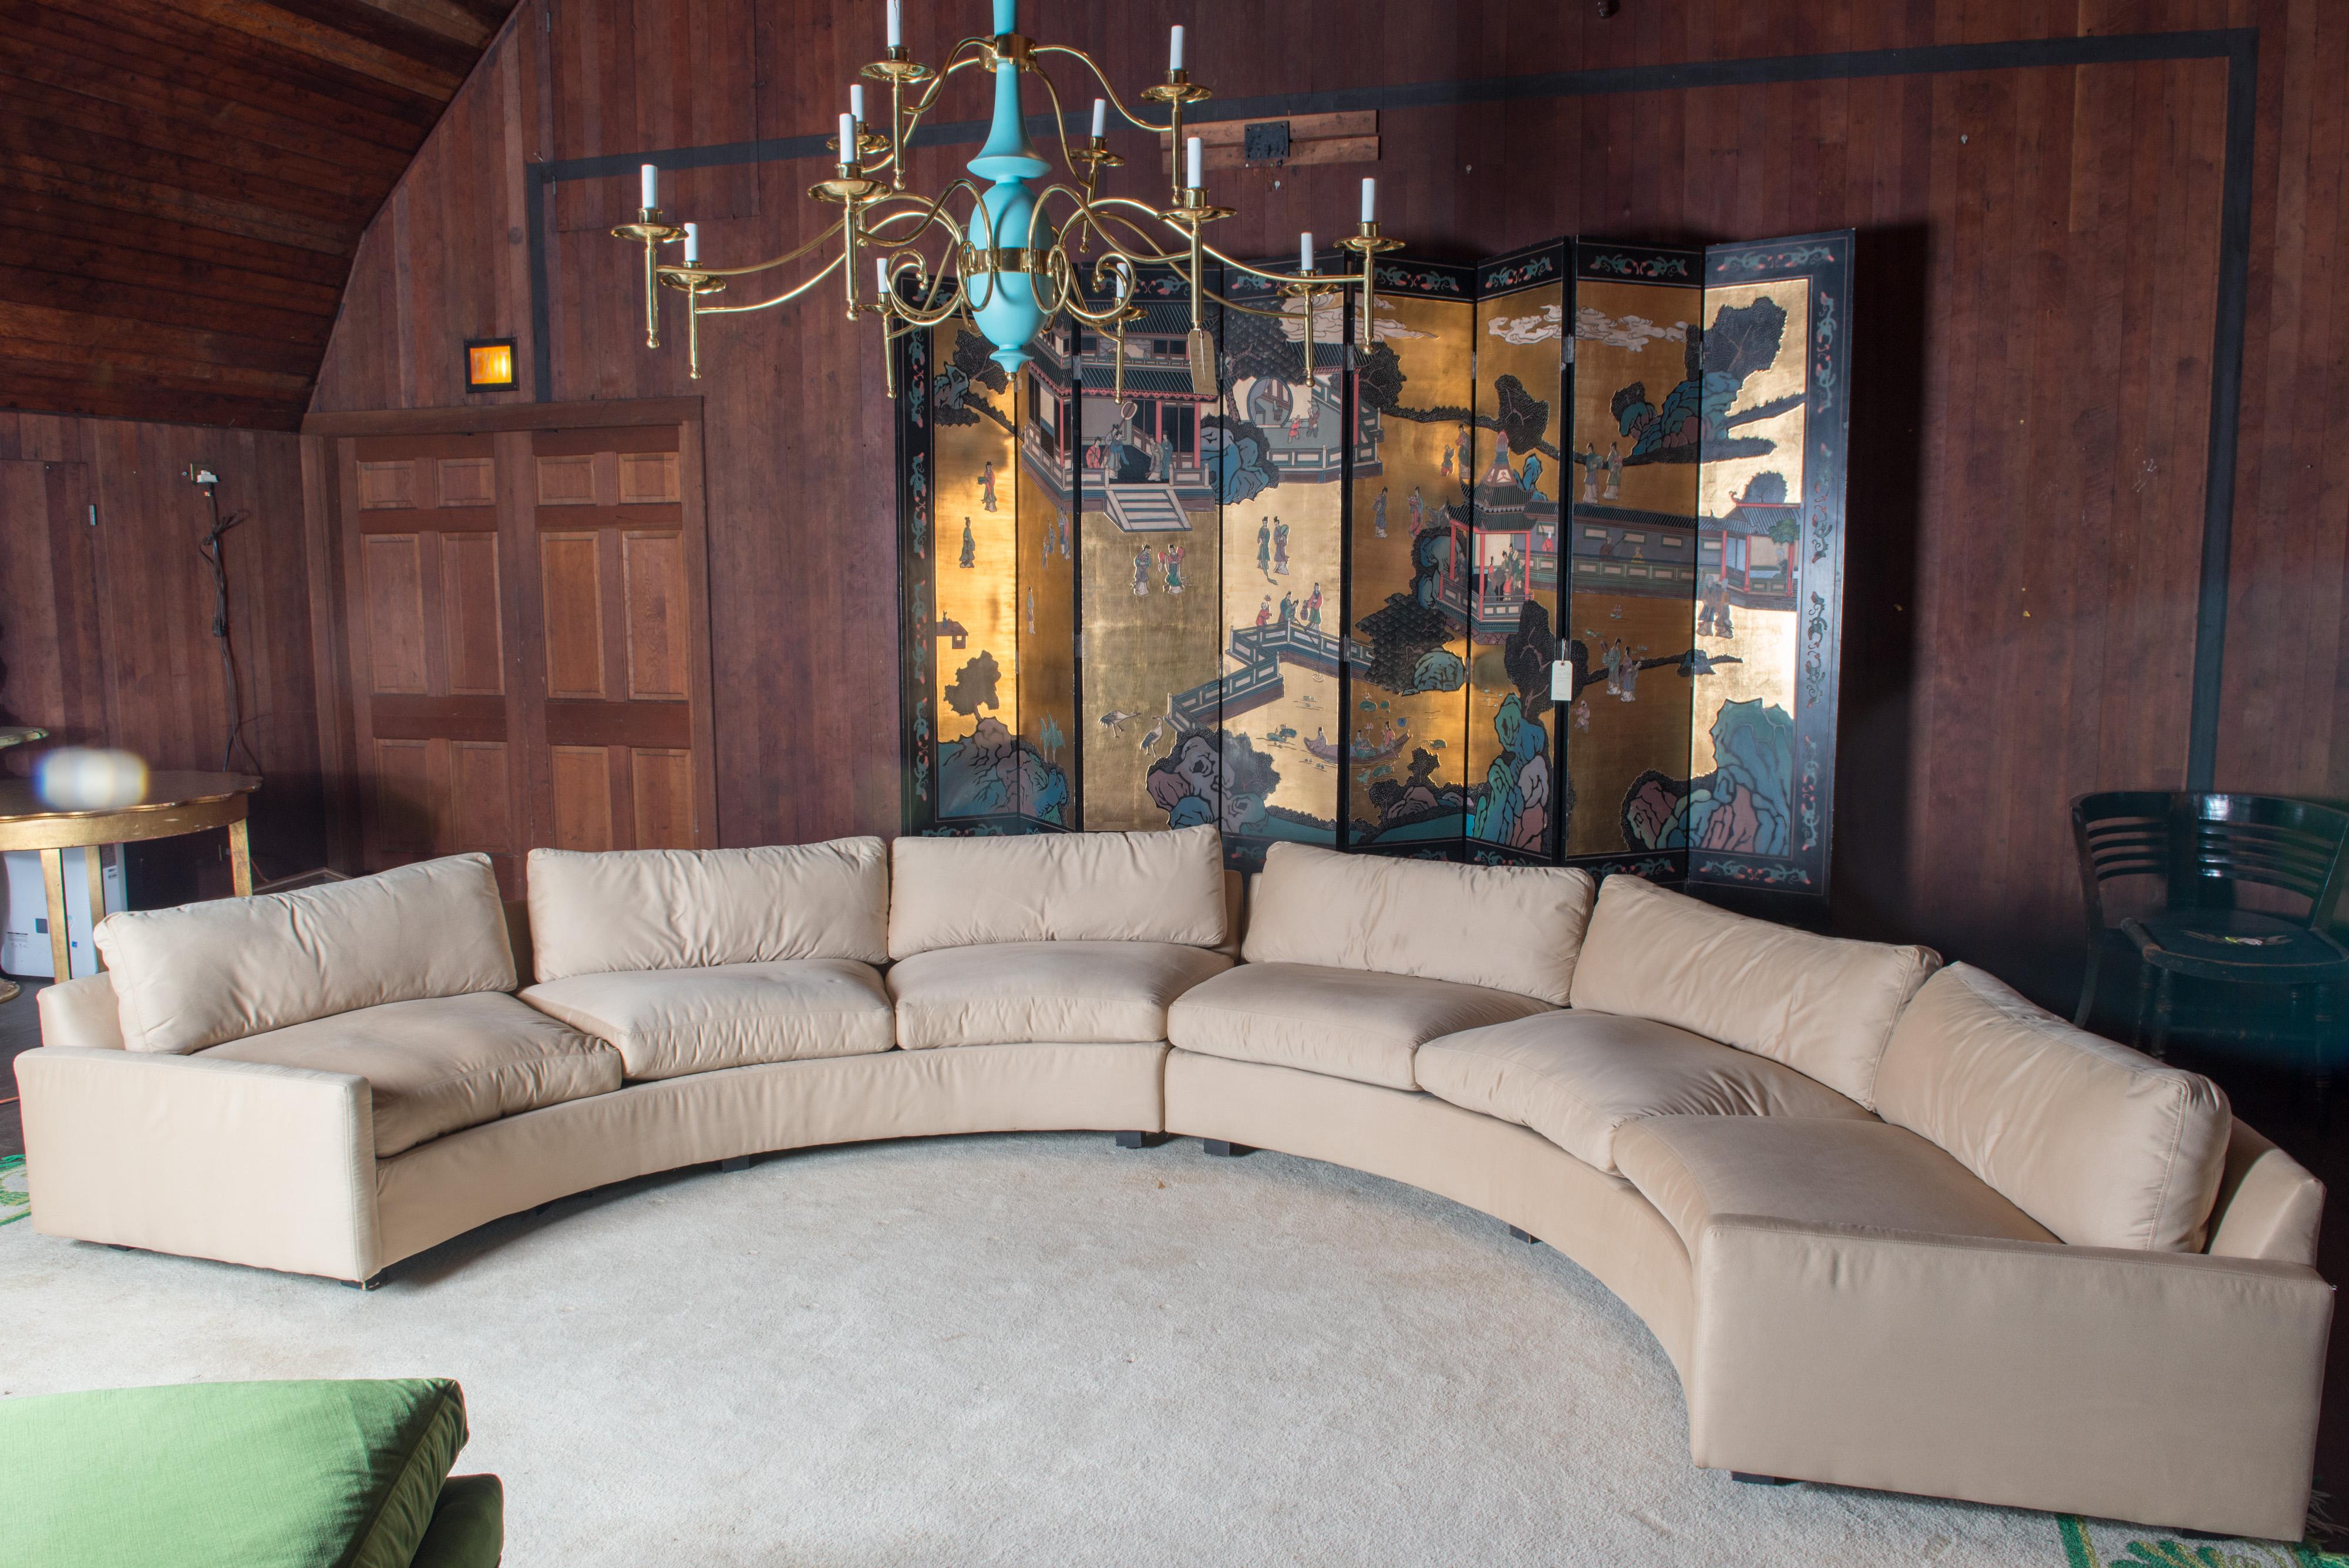 Fabulous two piece circular sectional sofa by Milo Baughman for Thayer Coggin.
The original cream colored fabric seems to be an ultra suede. There are no flaws to the fabric. It is useable. Cushions are good. The sofa has the original Thayer Coggin